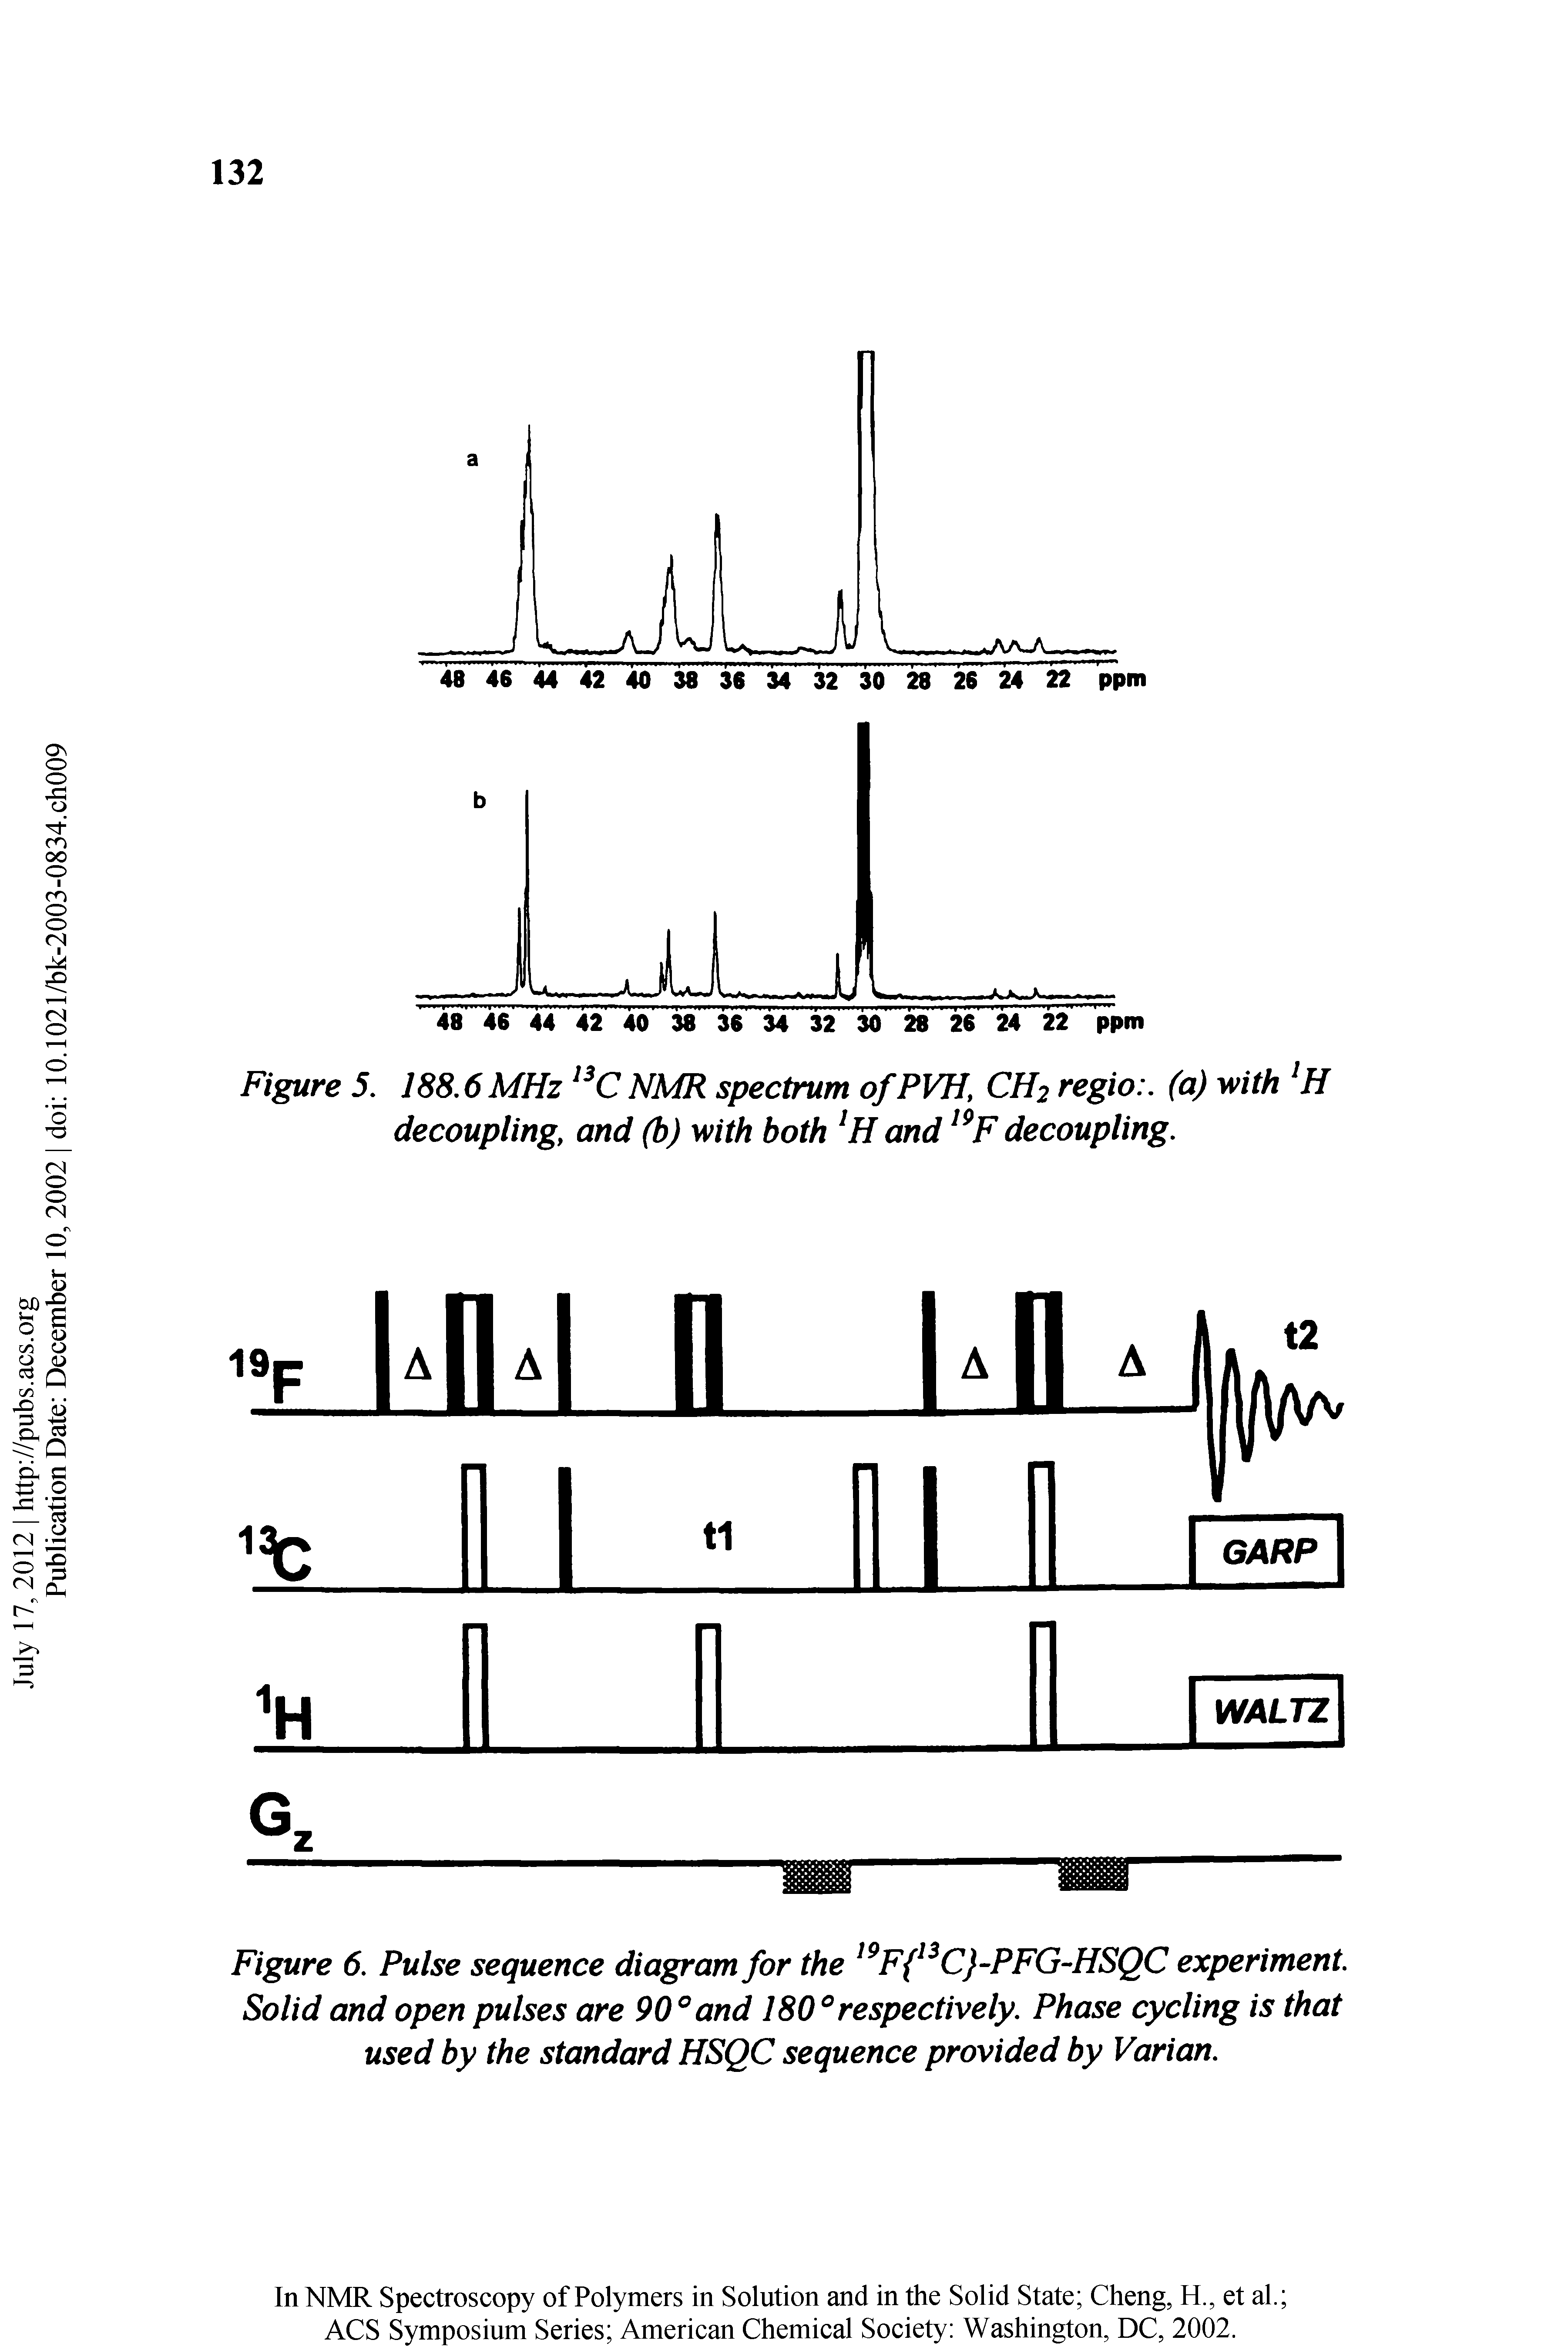 Figure 6. Pulse sequence diagram for the F C PFG-HSQC experiment. Solid and open pulses are 90° and 180° respectively. Phase cycling is that used by the standard HSQC sequence provided by Varian.